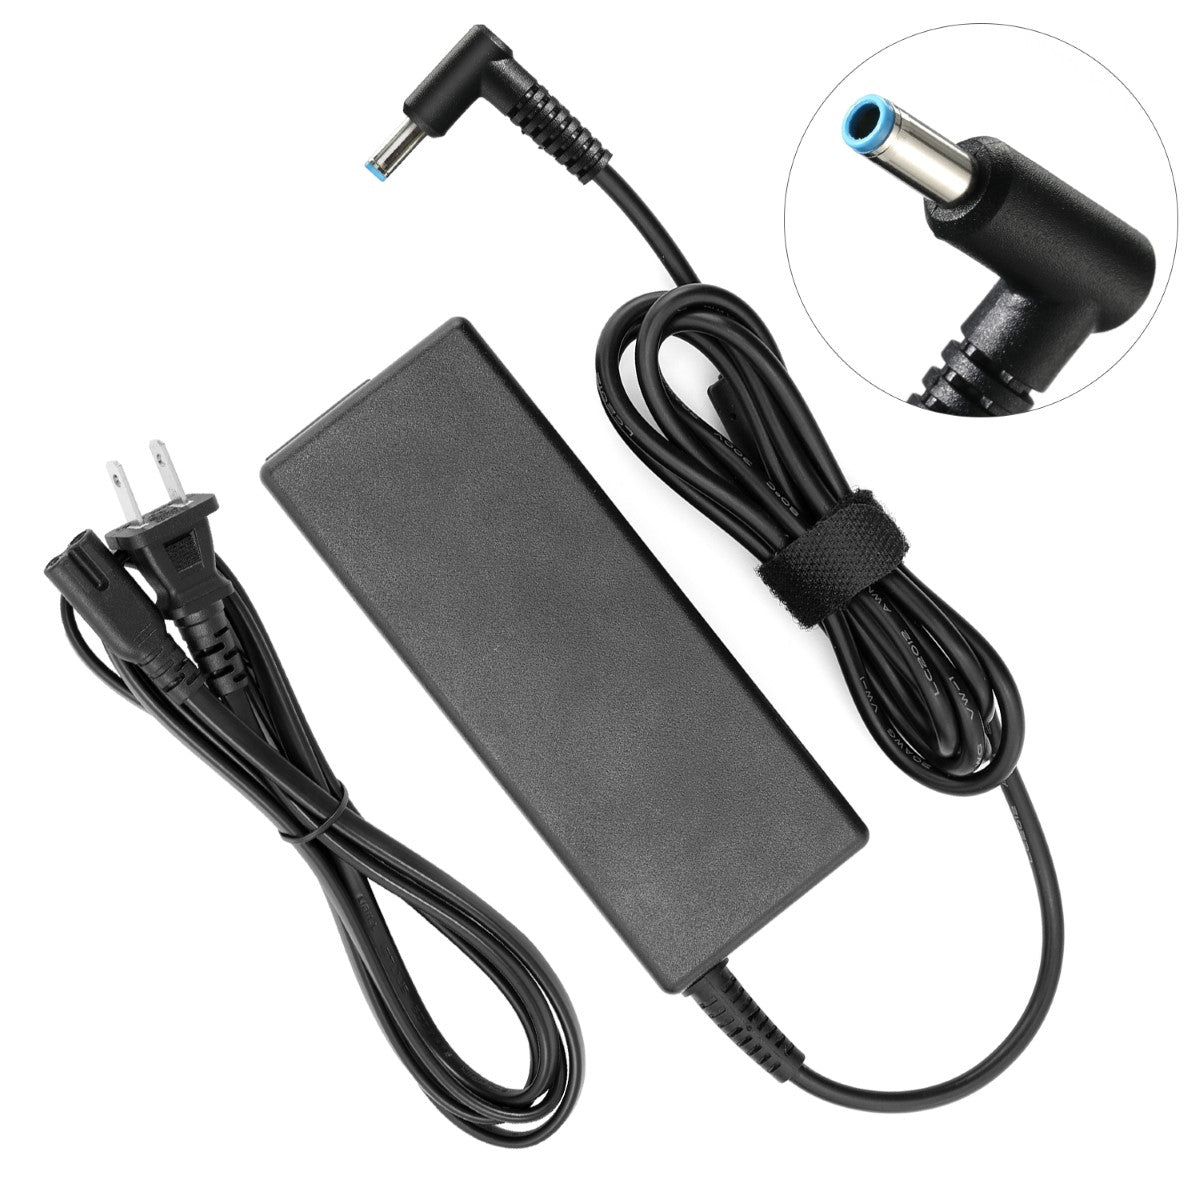 Charger for HP 15-g227ds Notebook.